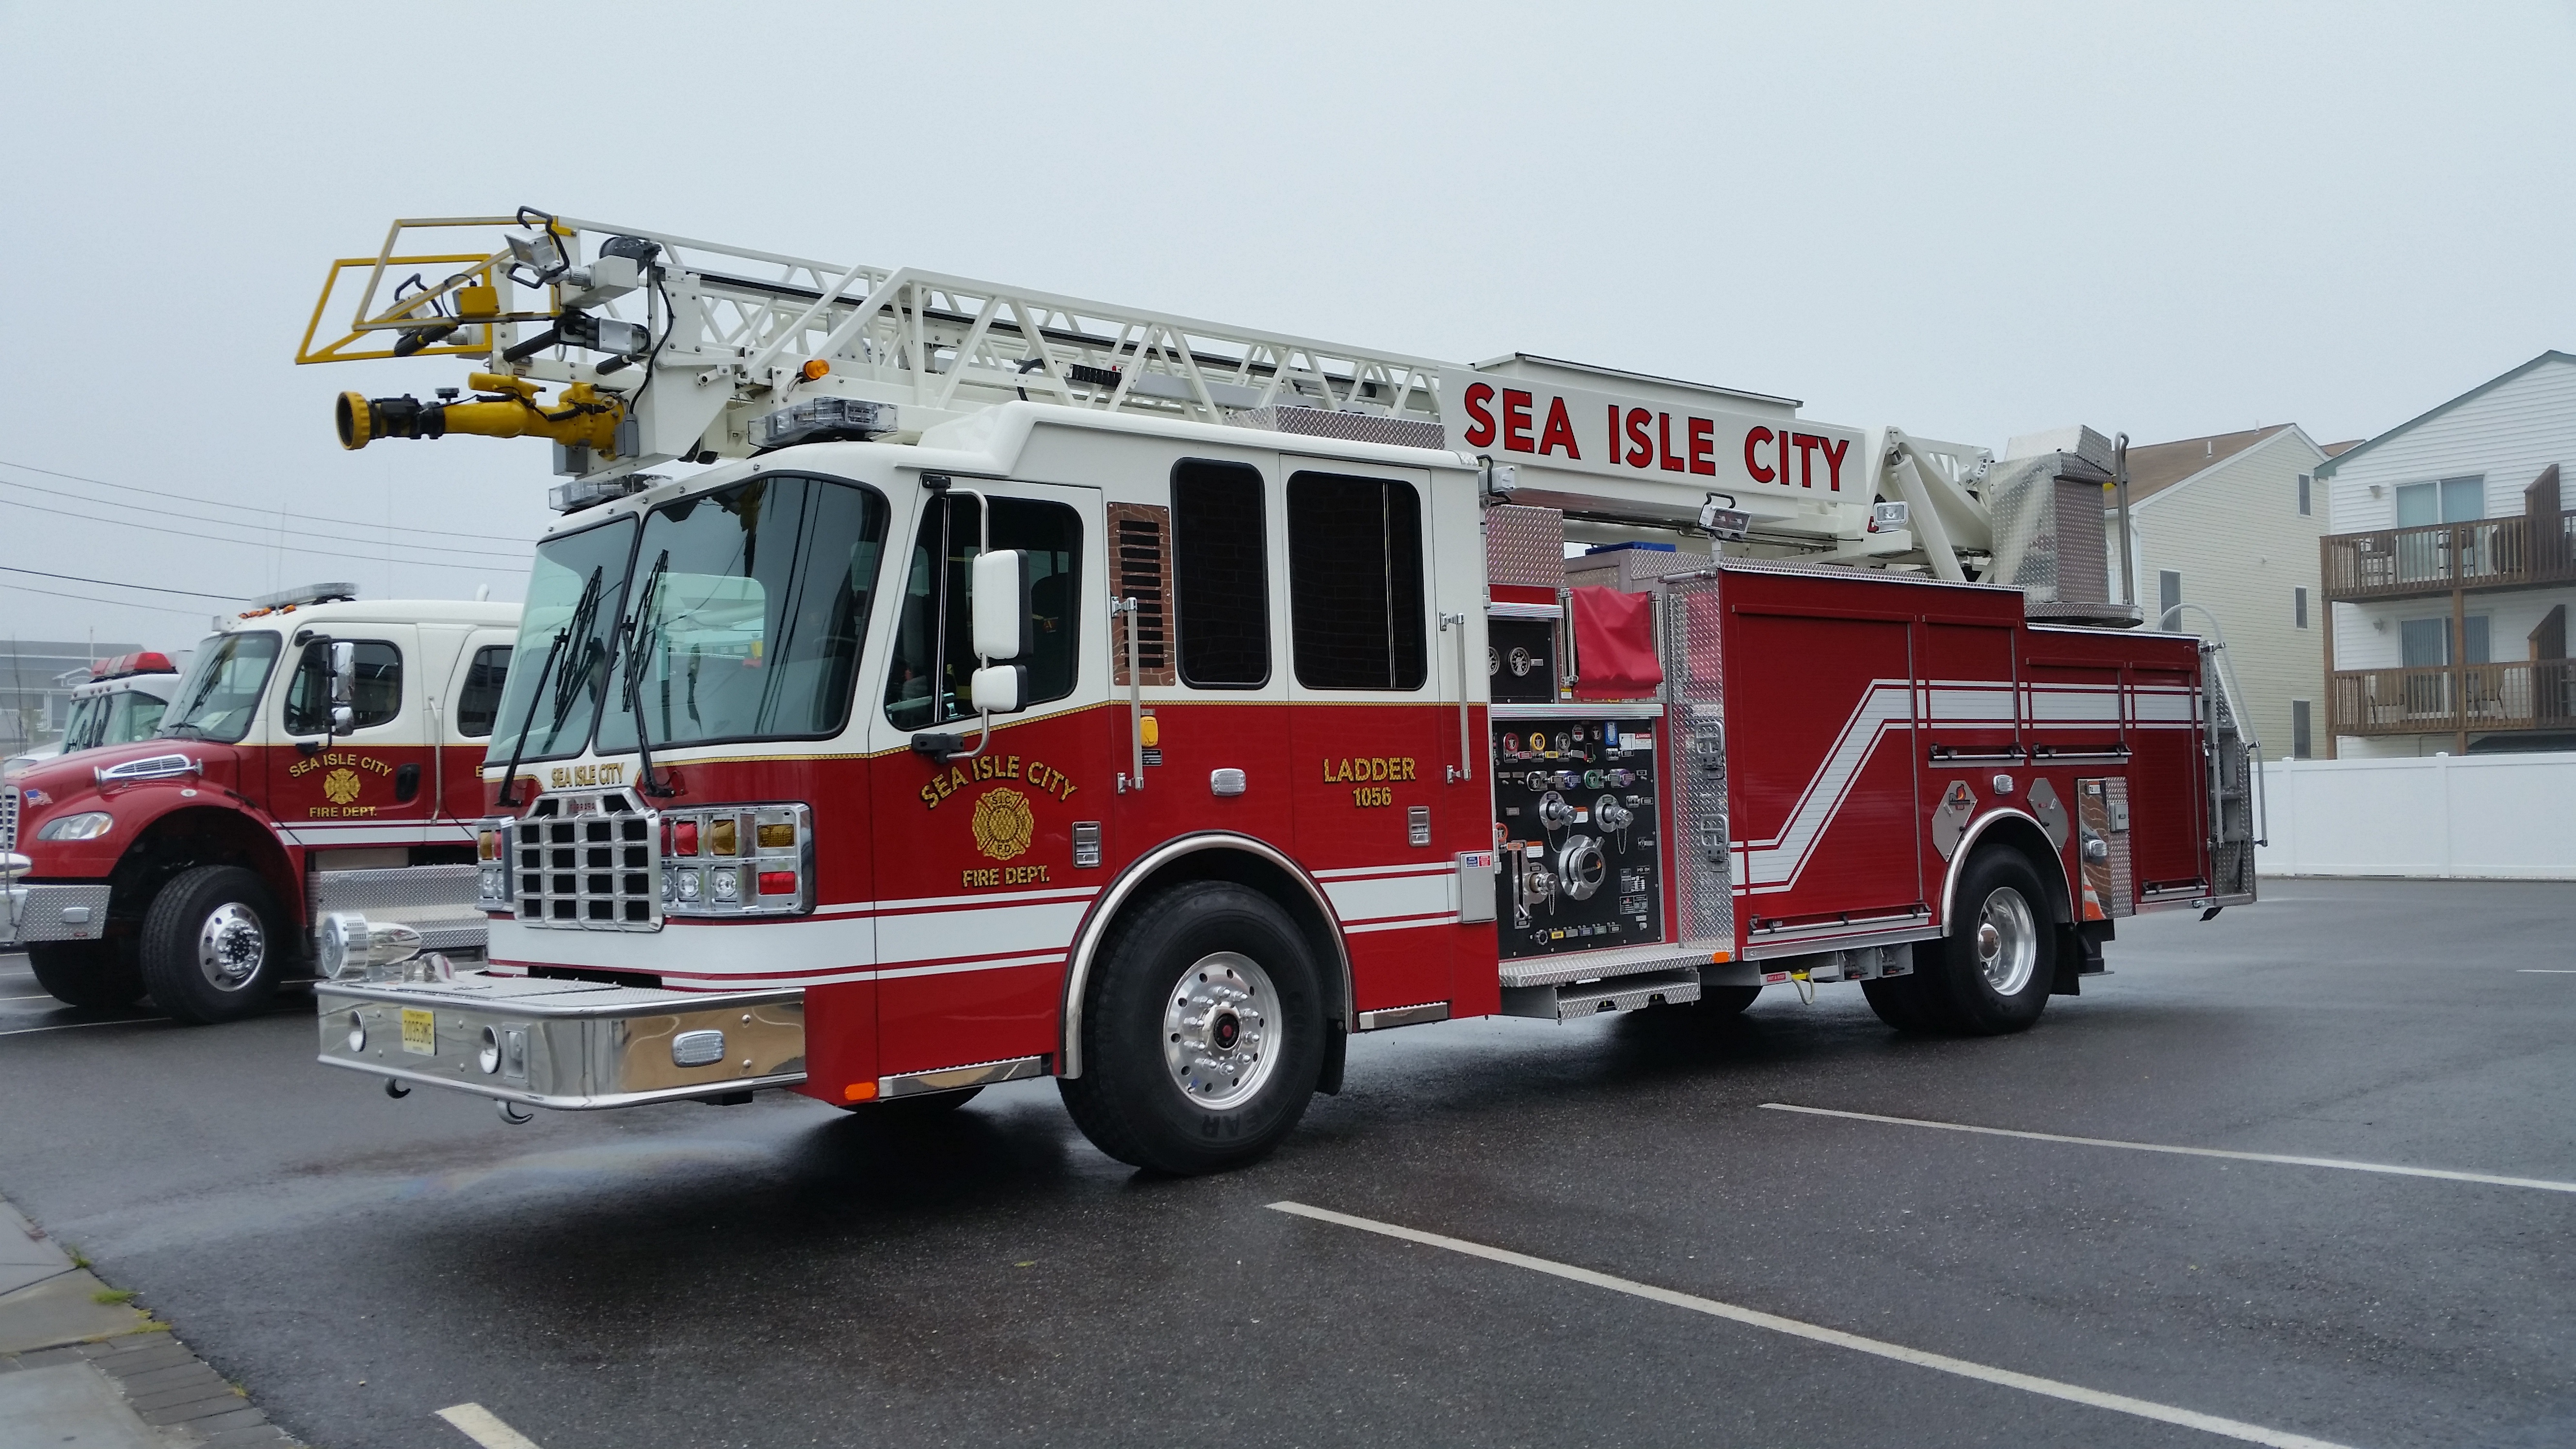 On Thursday night, the Sea Isle City Fire Department responded to 5605 Cent...